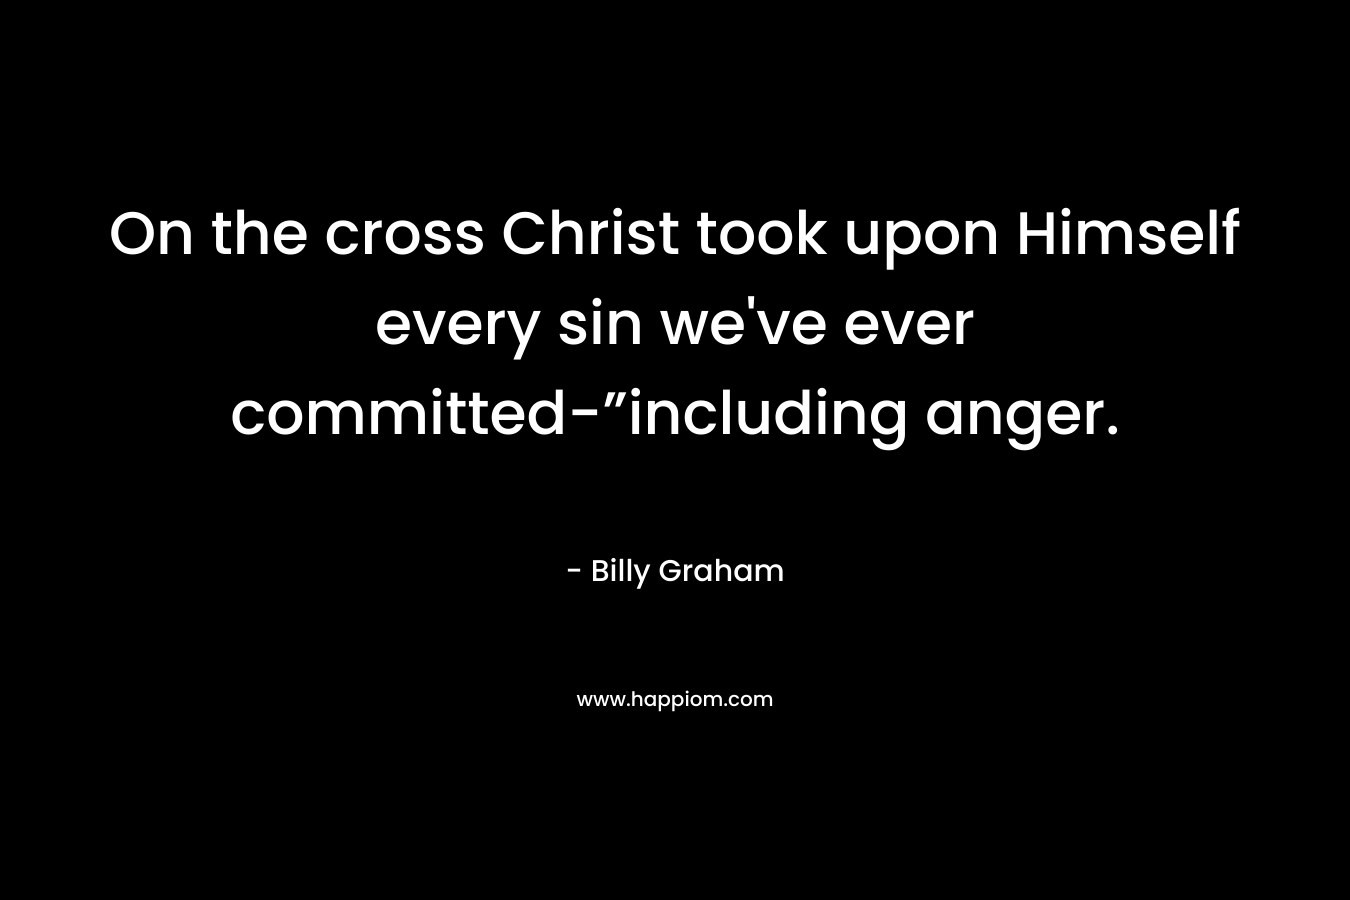 On the cross Christ took upon Himself every sin we've ever committed-”including anger.